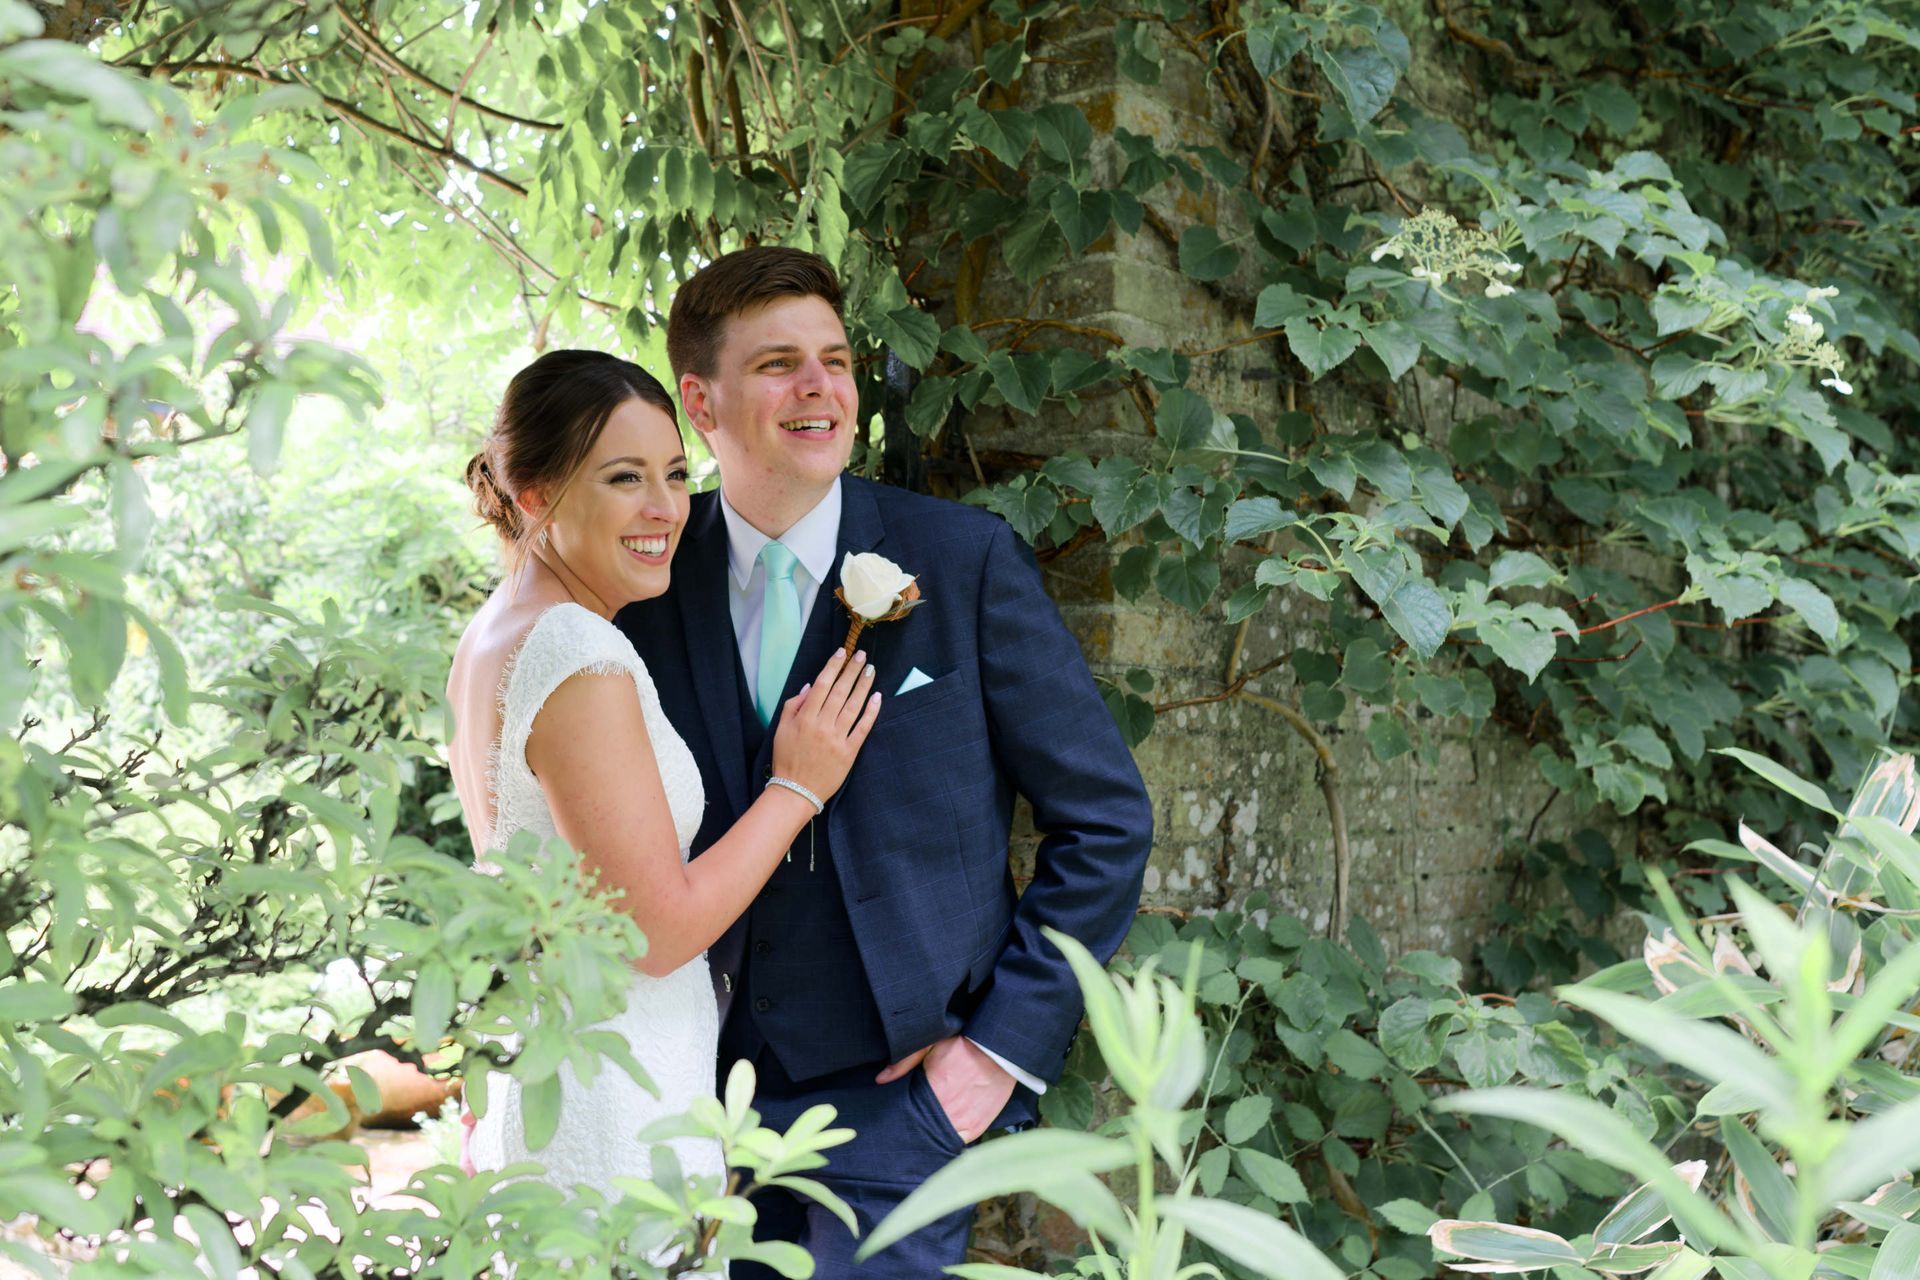 A bride and groom are posing for a picture in the woods.